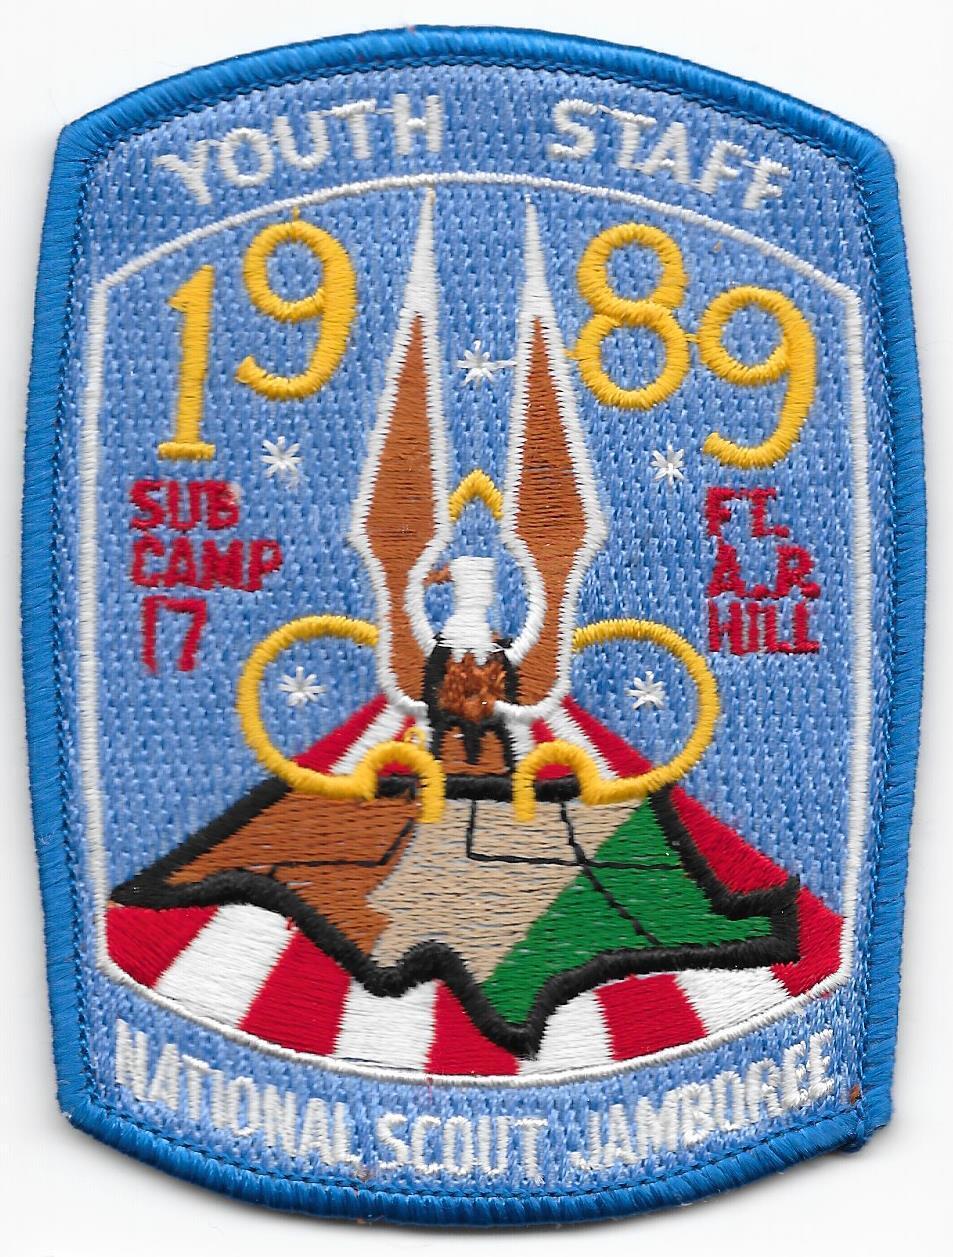 Youth Staff Subcamp 17 Patch 1989 National Jamboree Boy Scouts of America BSA BP